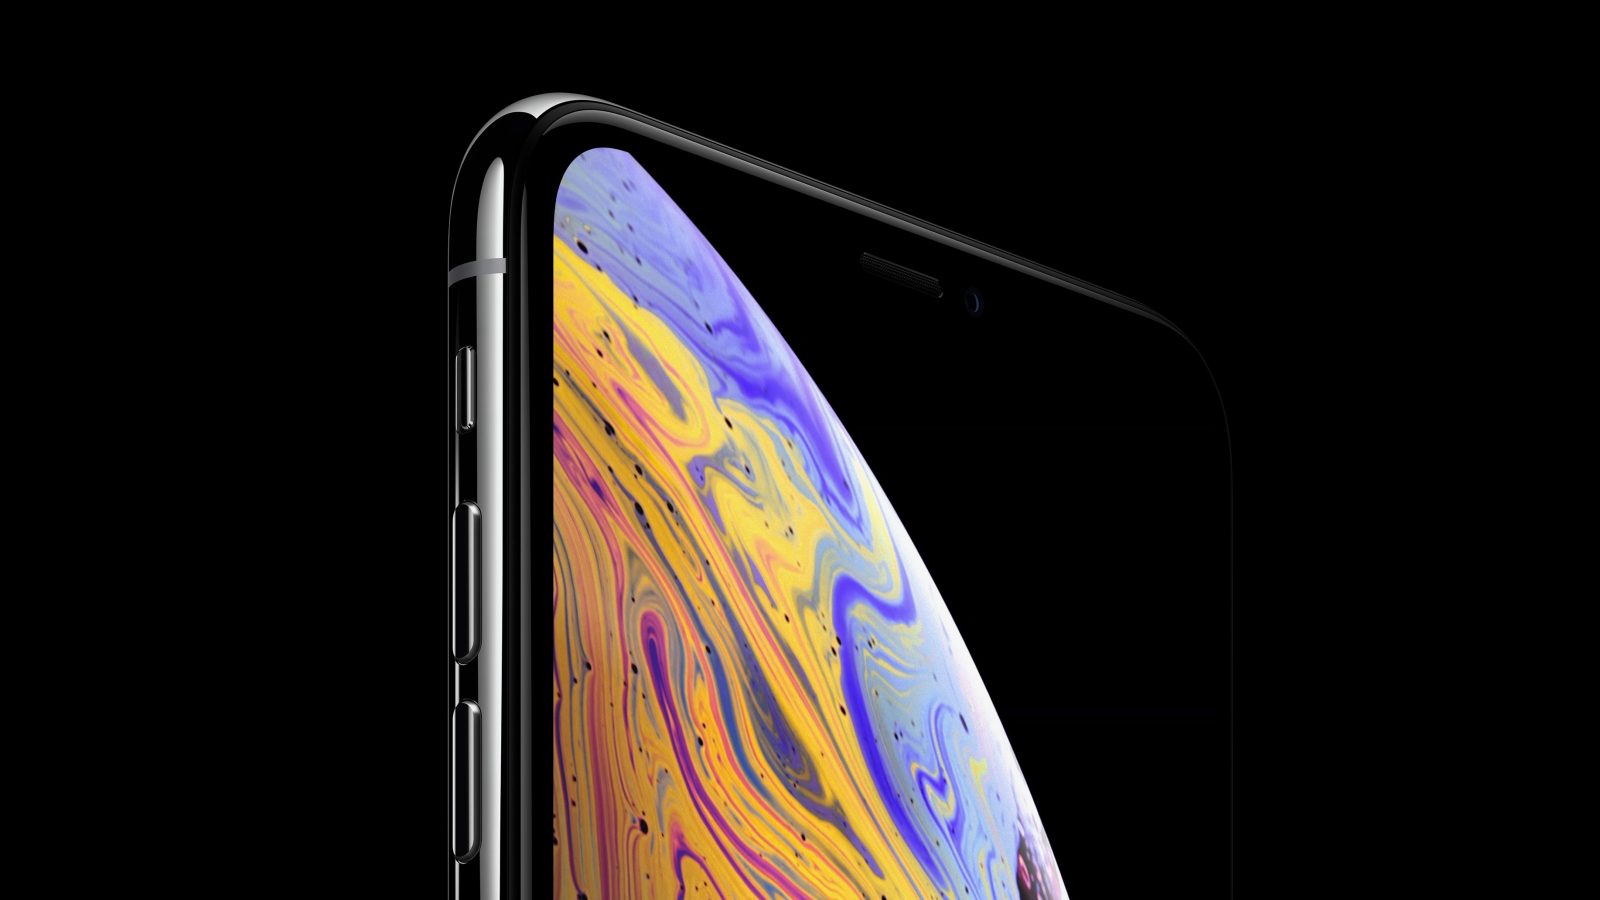 Download the new iPhone Xs and iPhone Xs Max wallpapers right here